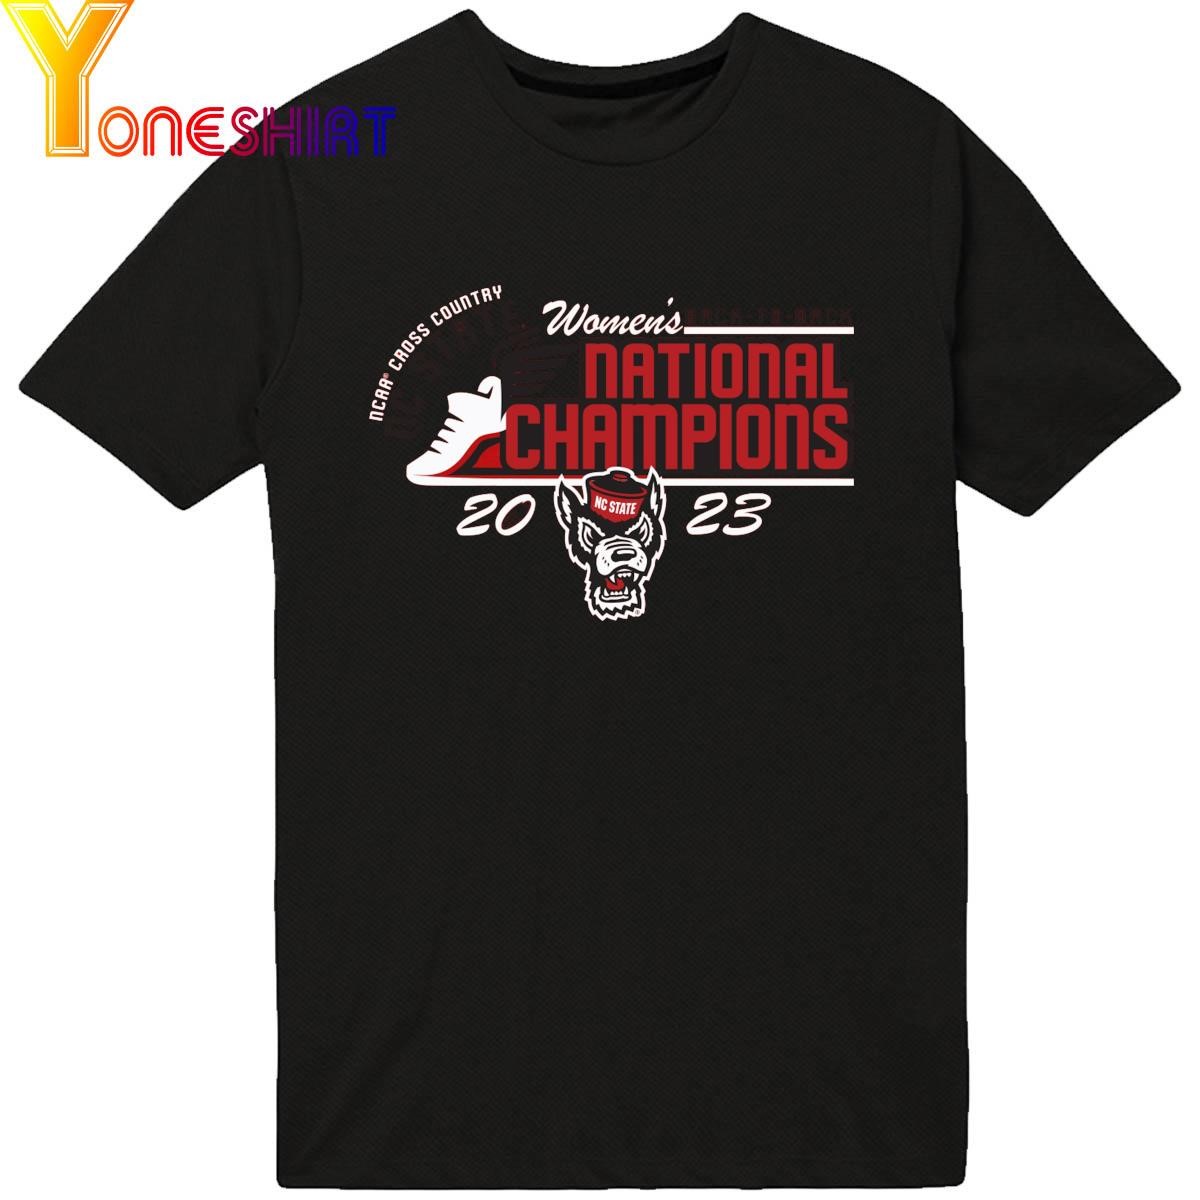 NC State Wolfpack Ncaa Cross Country Women's Back-to-back National Champions 2023 Shirt